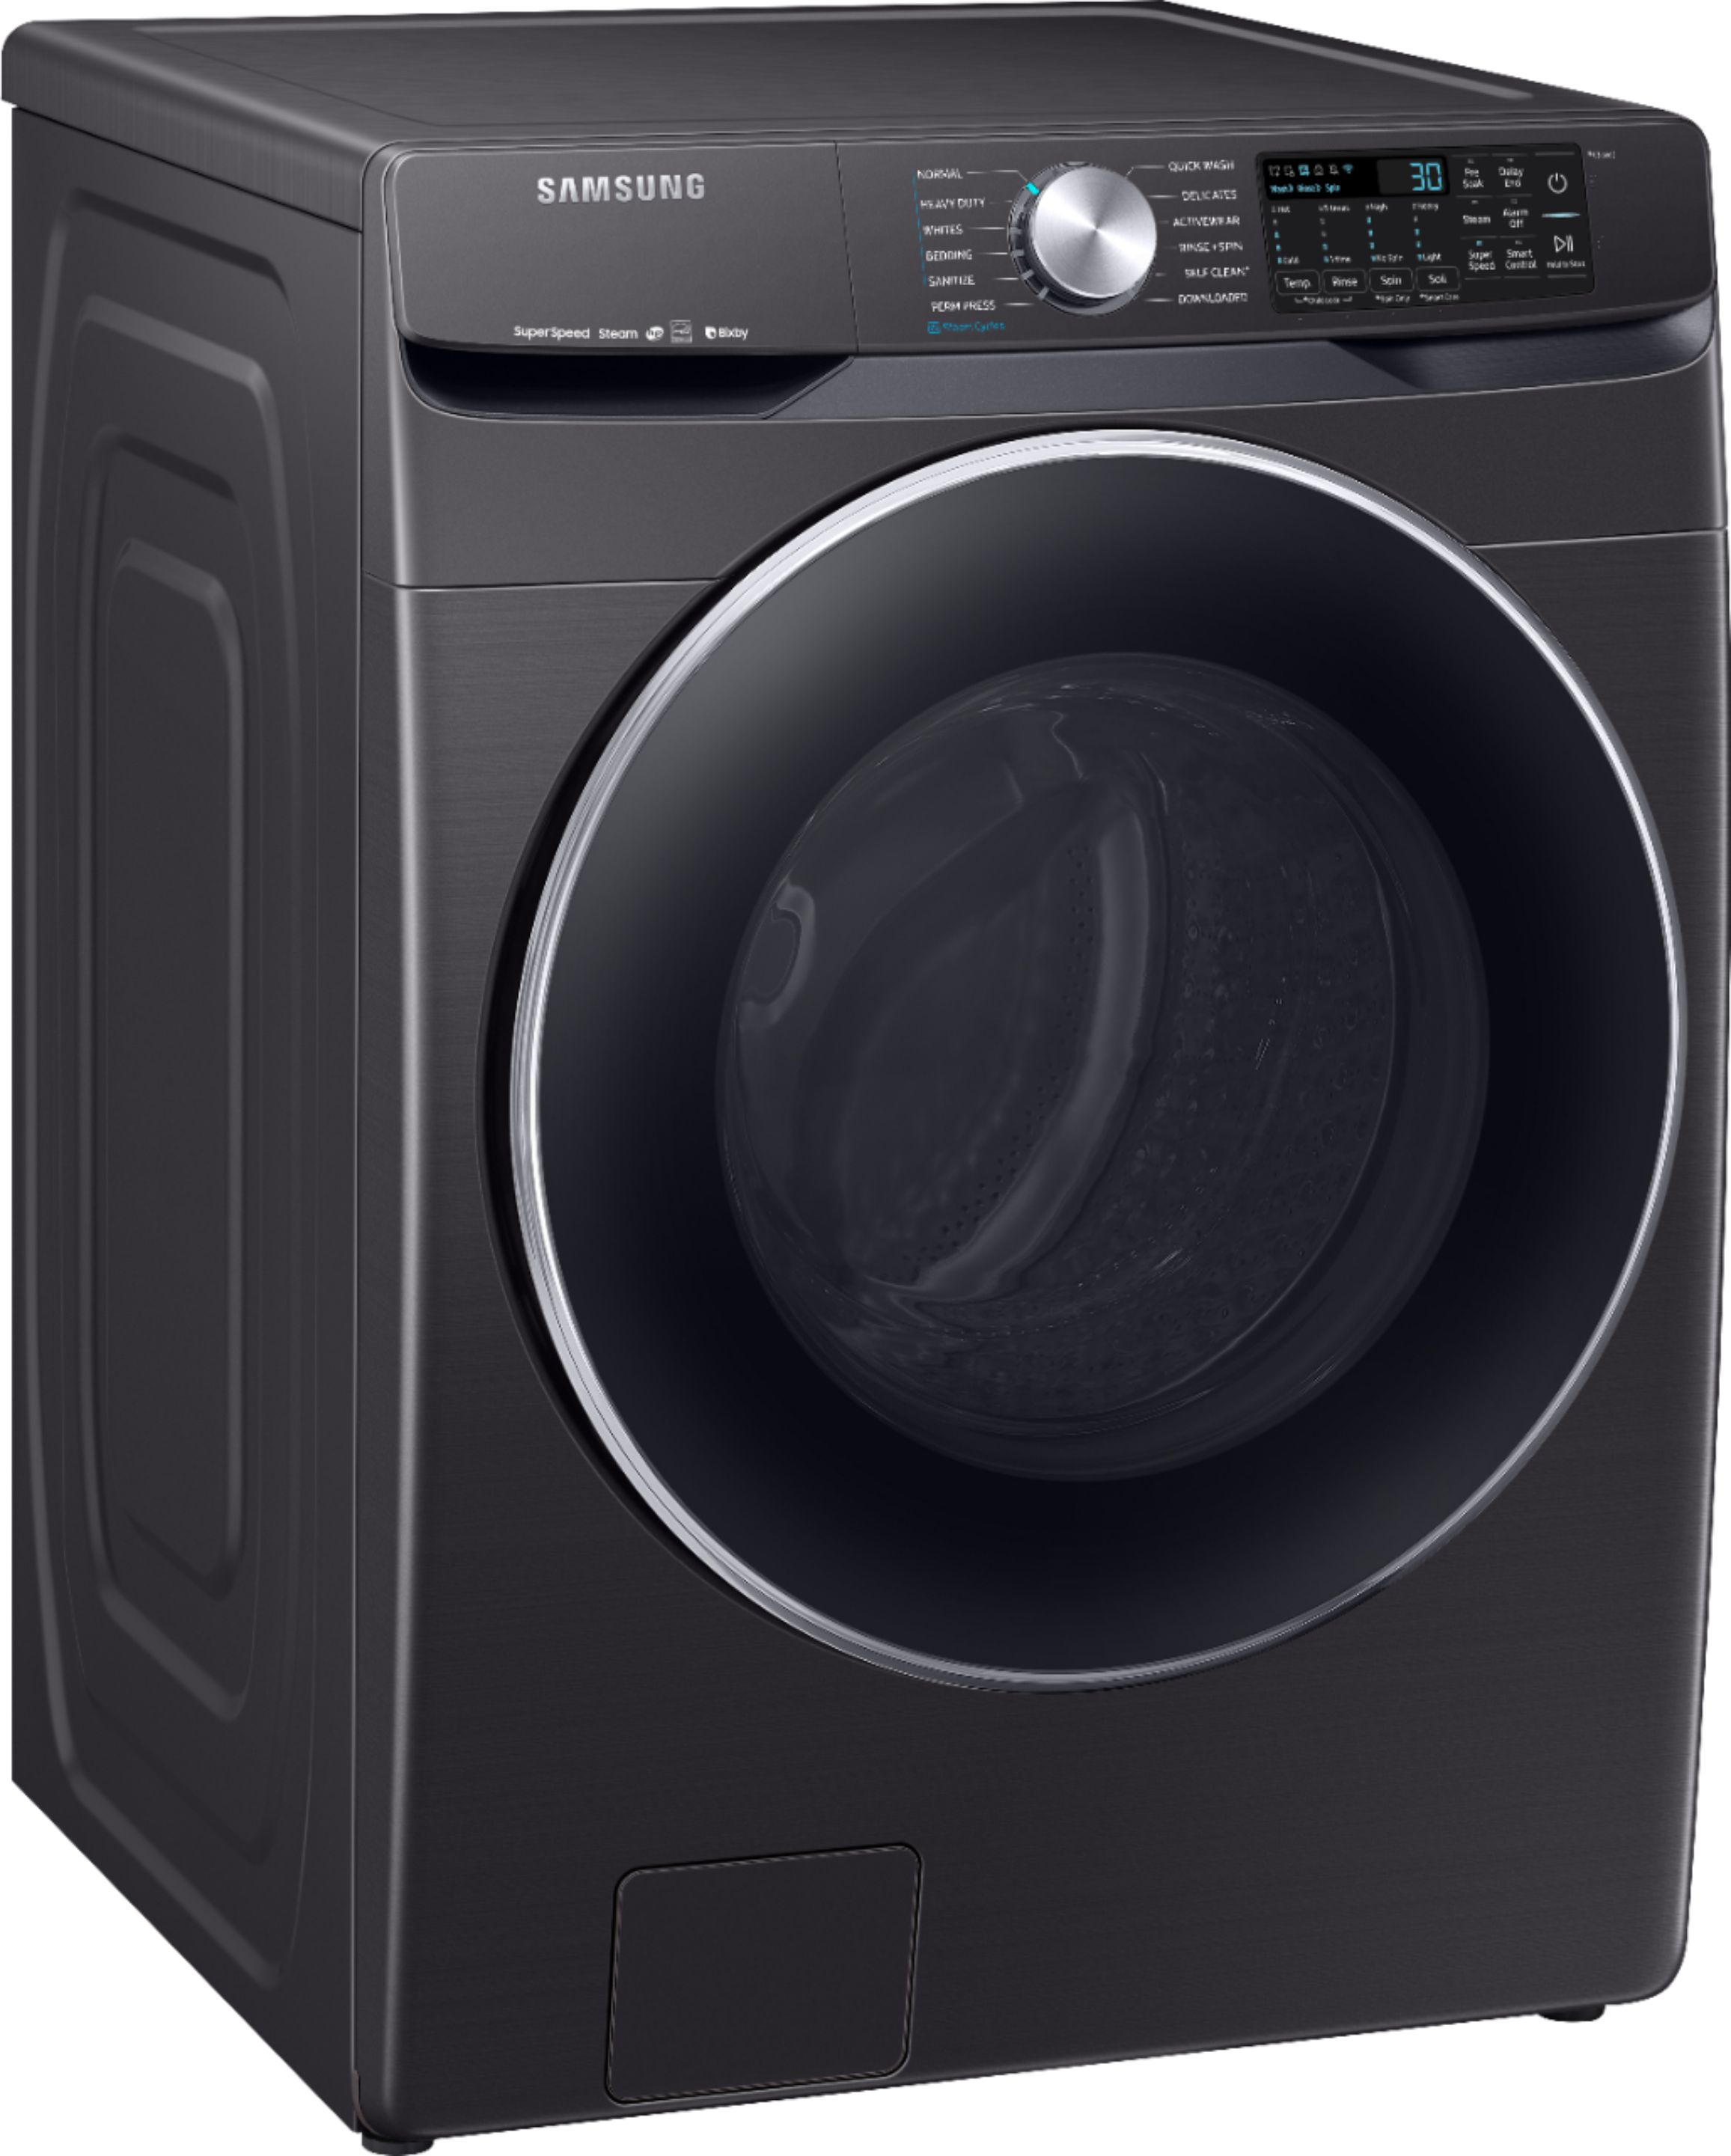 Angle View: Samsung - 4.5 Cu. Ft. High Efficiency Stackable Smart Front Load Washer with Steam and Super Speed - Black stainless steel